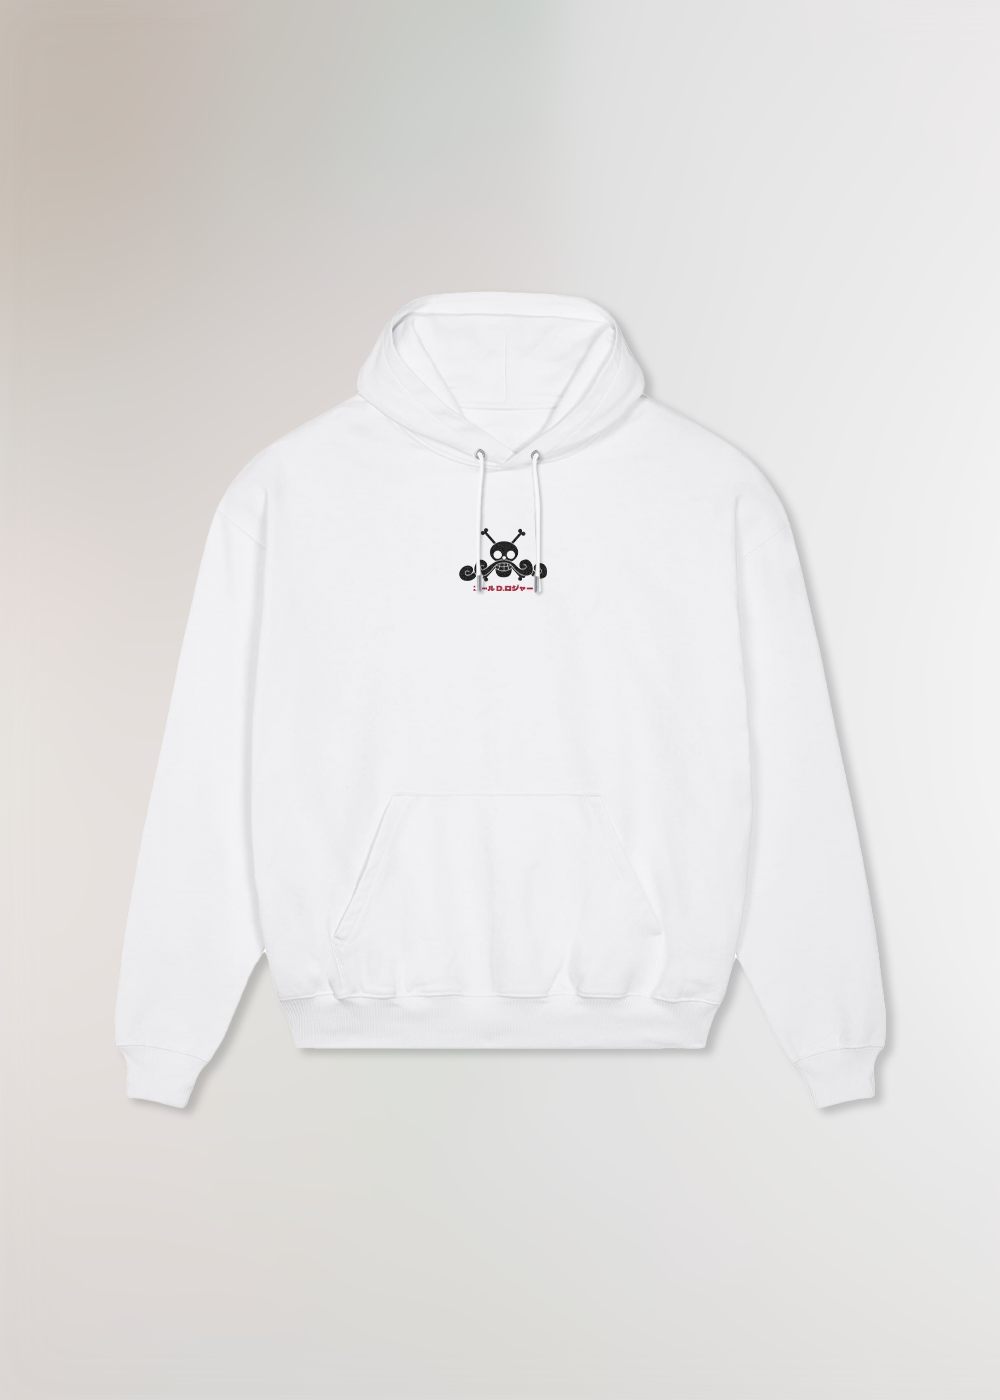 MADE IN JAPAN - KING OF THE PIRATES® OVERSIZE WHITE HOODIE